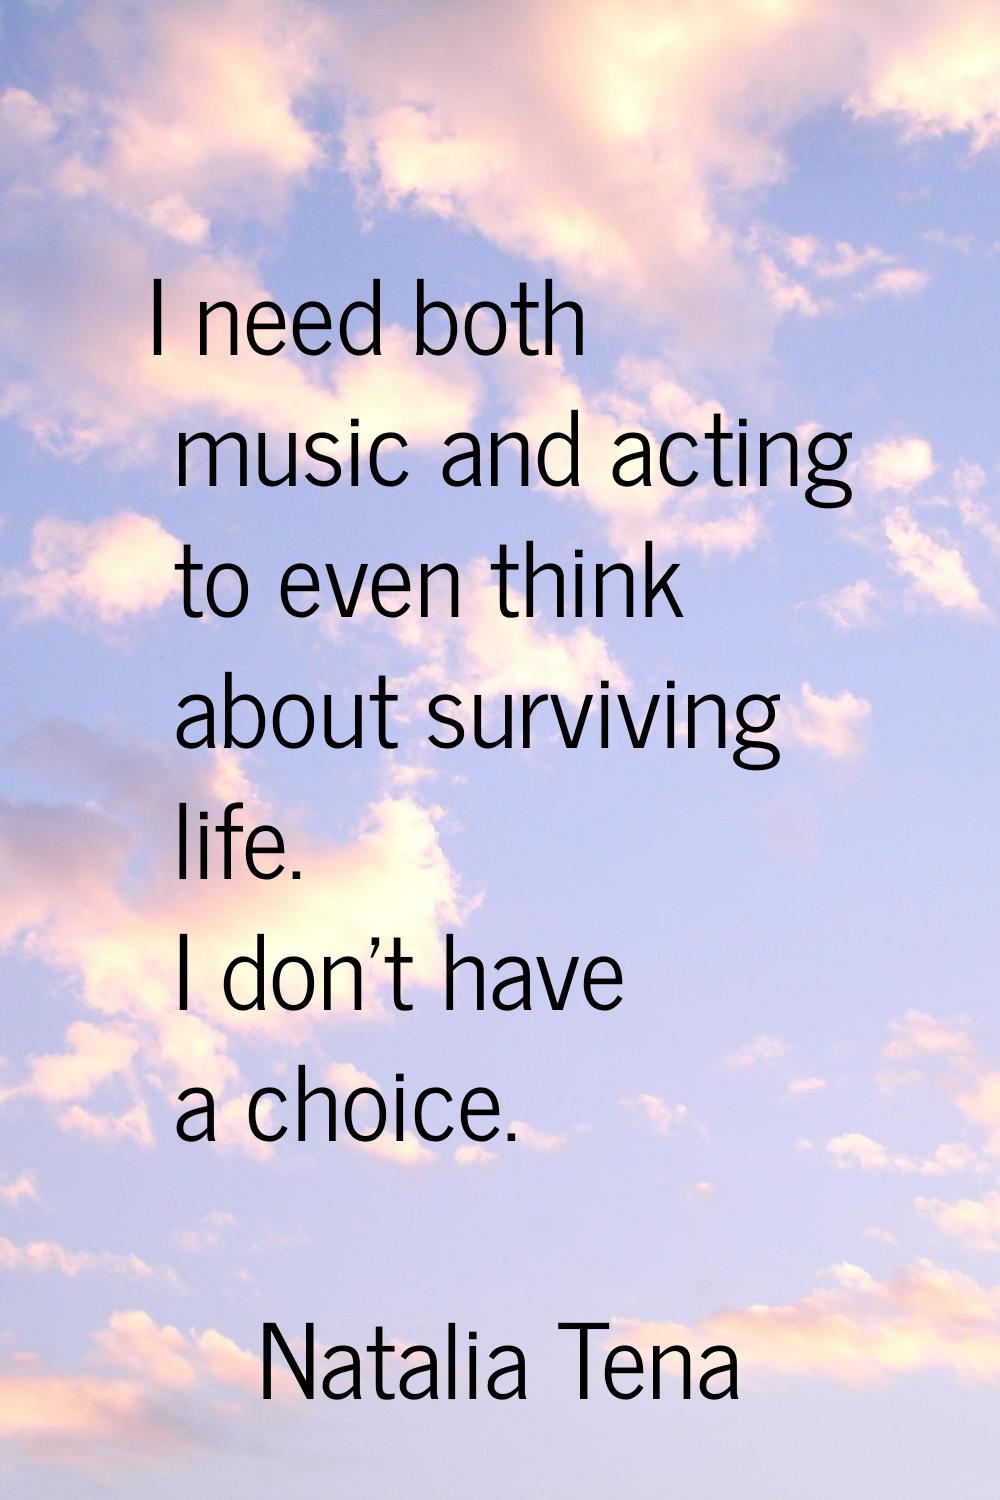 I need both music and acting to even think about surviving life. I don't have a choice.